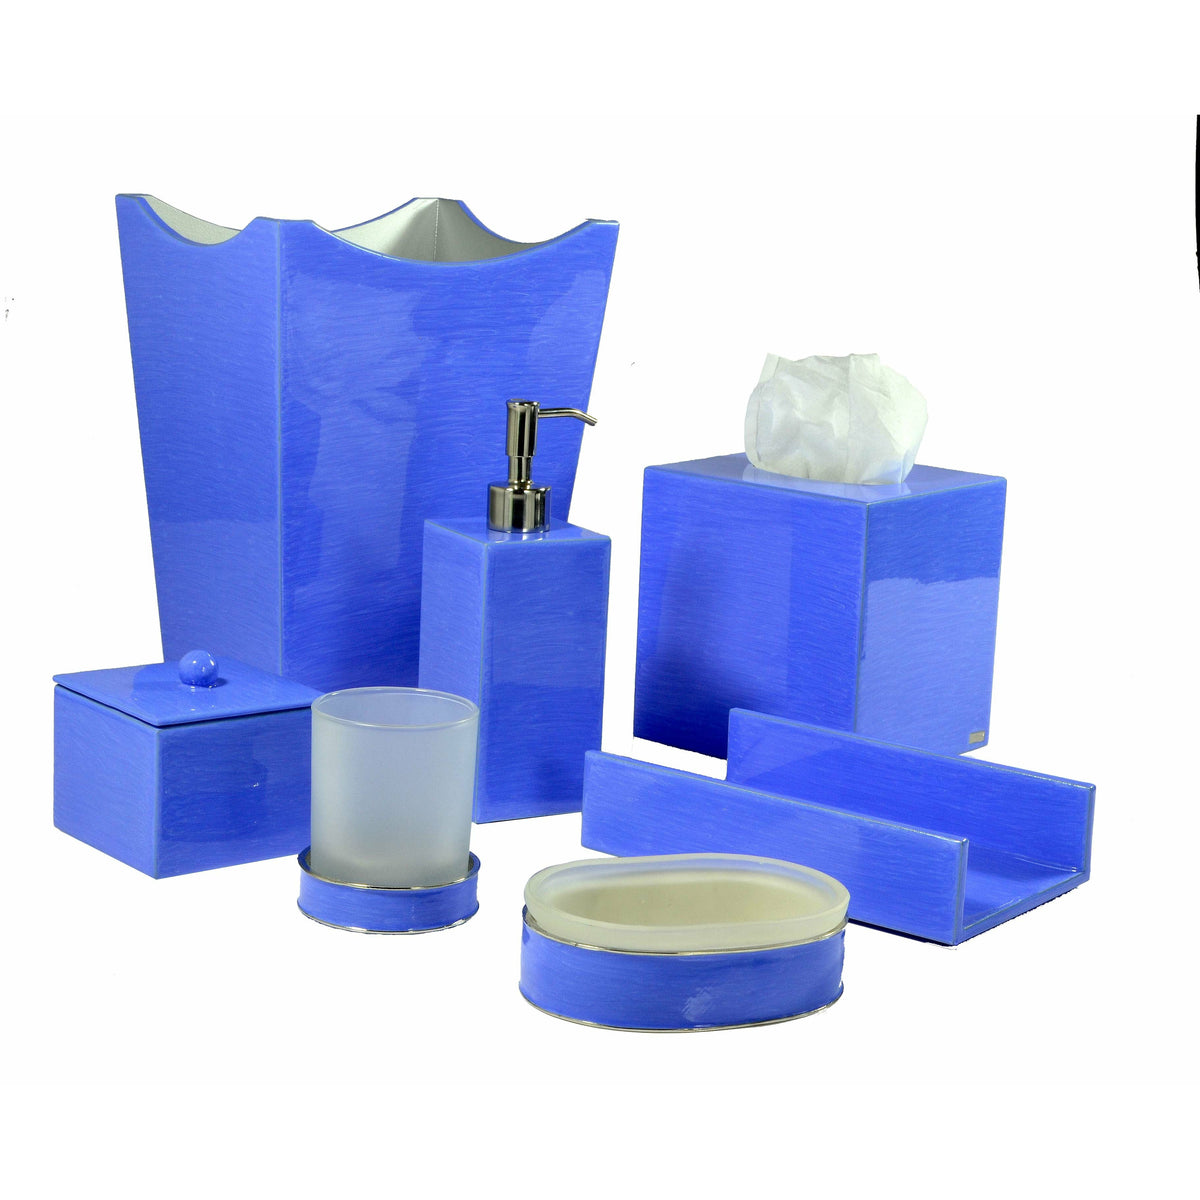 Mike and Ally Essentials Basic Enamel Bath Accessories Periwinkle Set